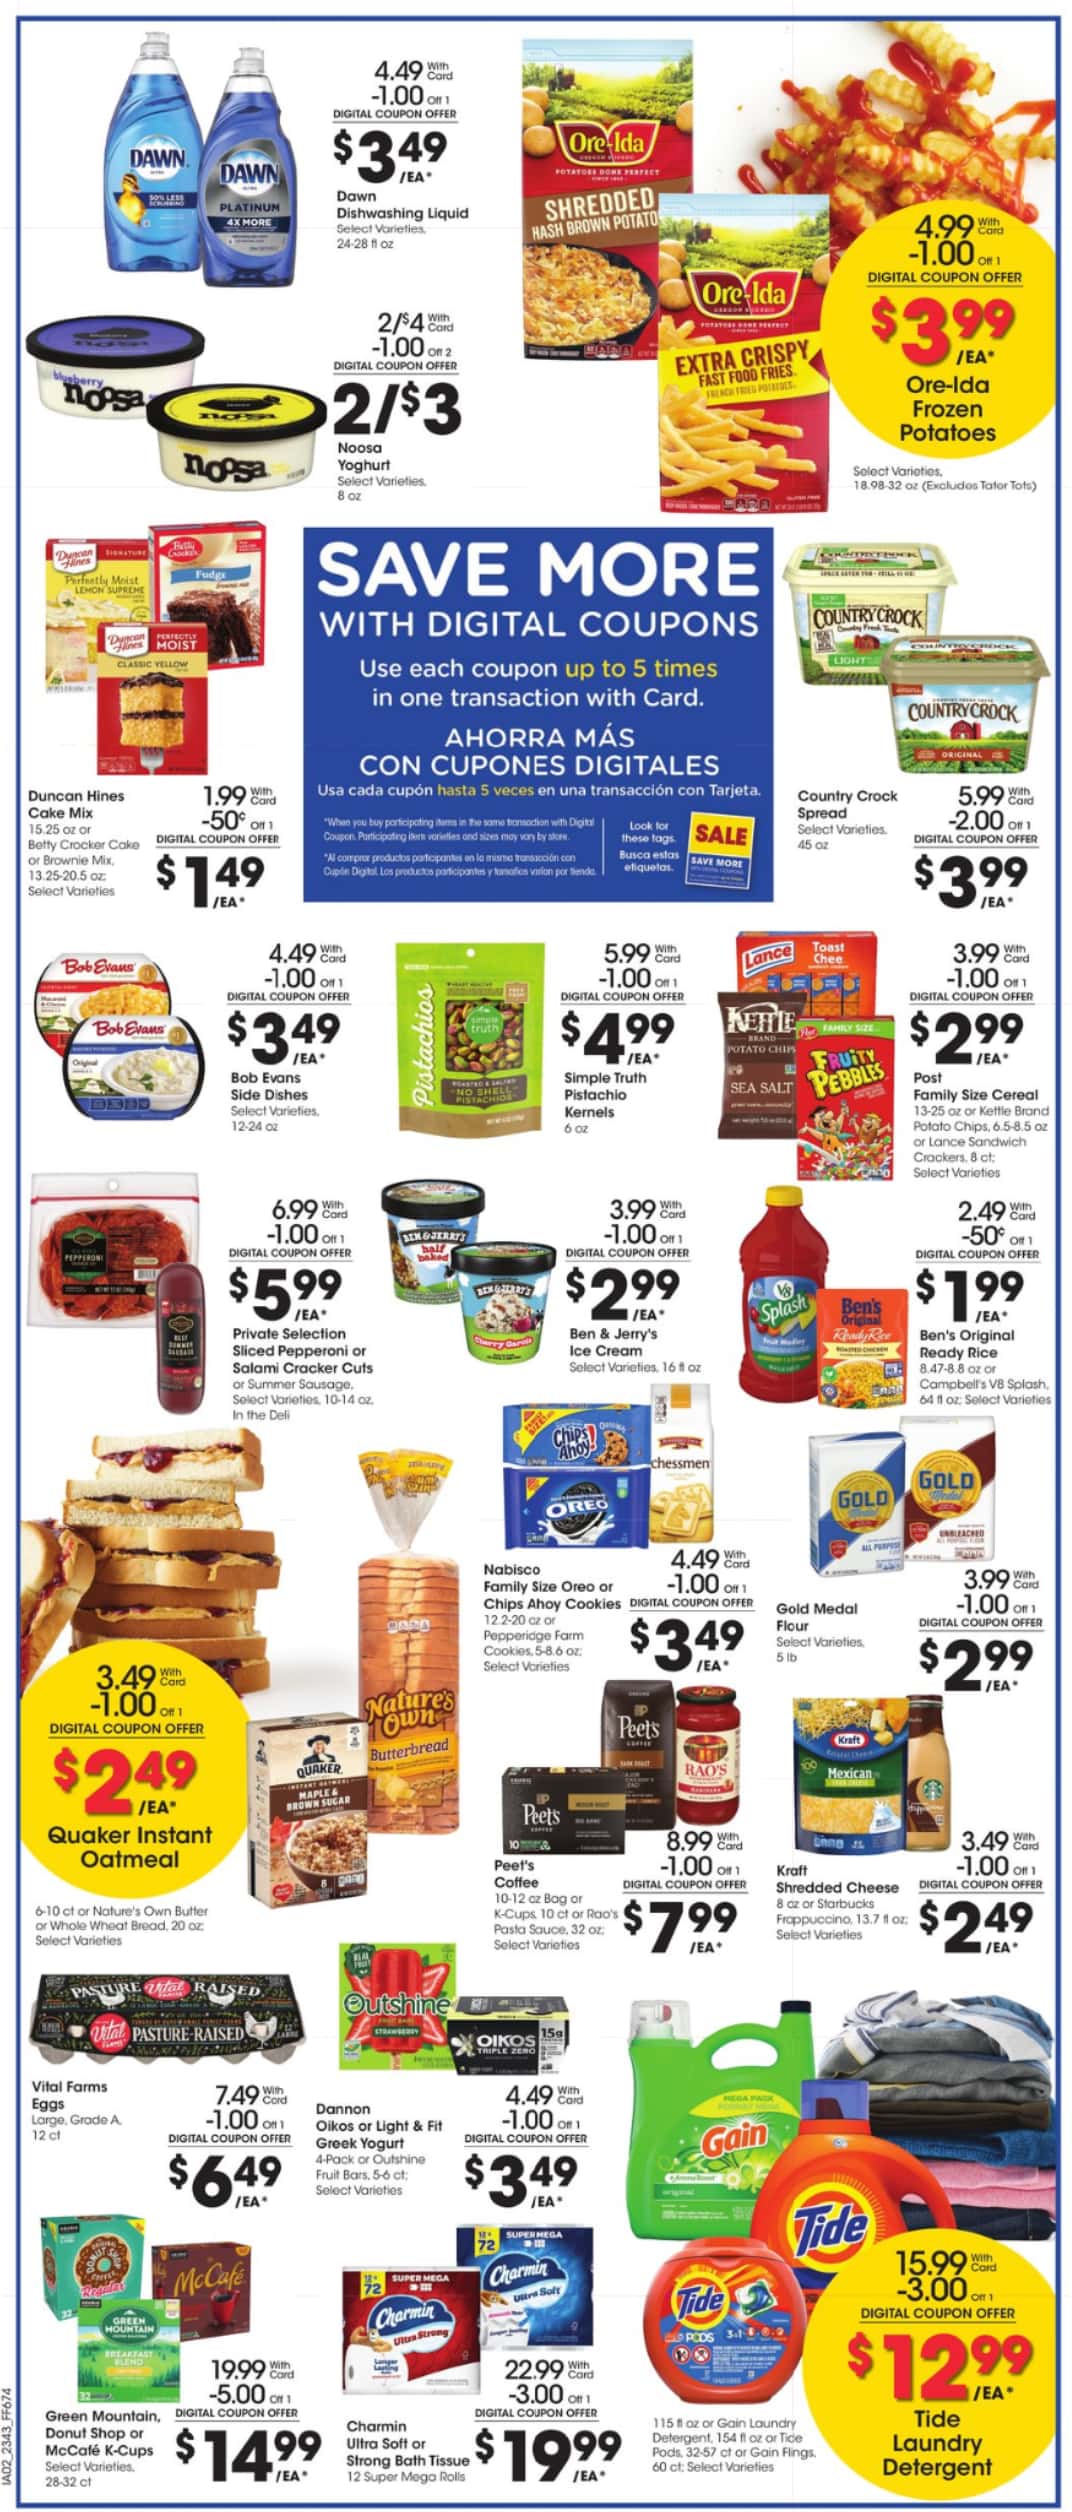 Fry's Food Black Friday July 2024 Weekly Sales, Deals, Discounts and Digital Coupons.